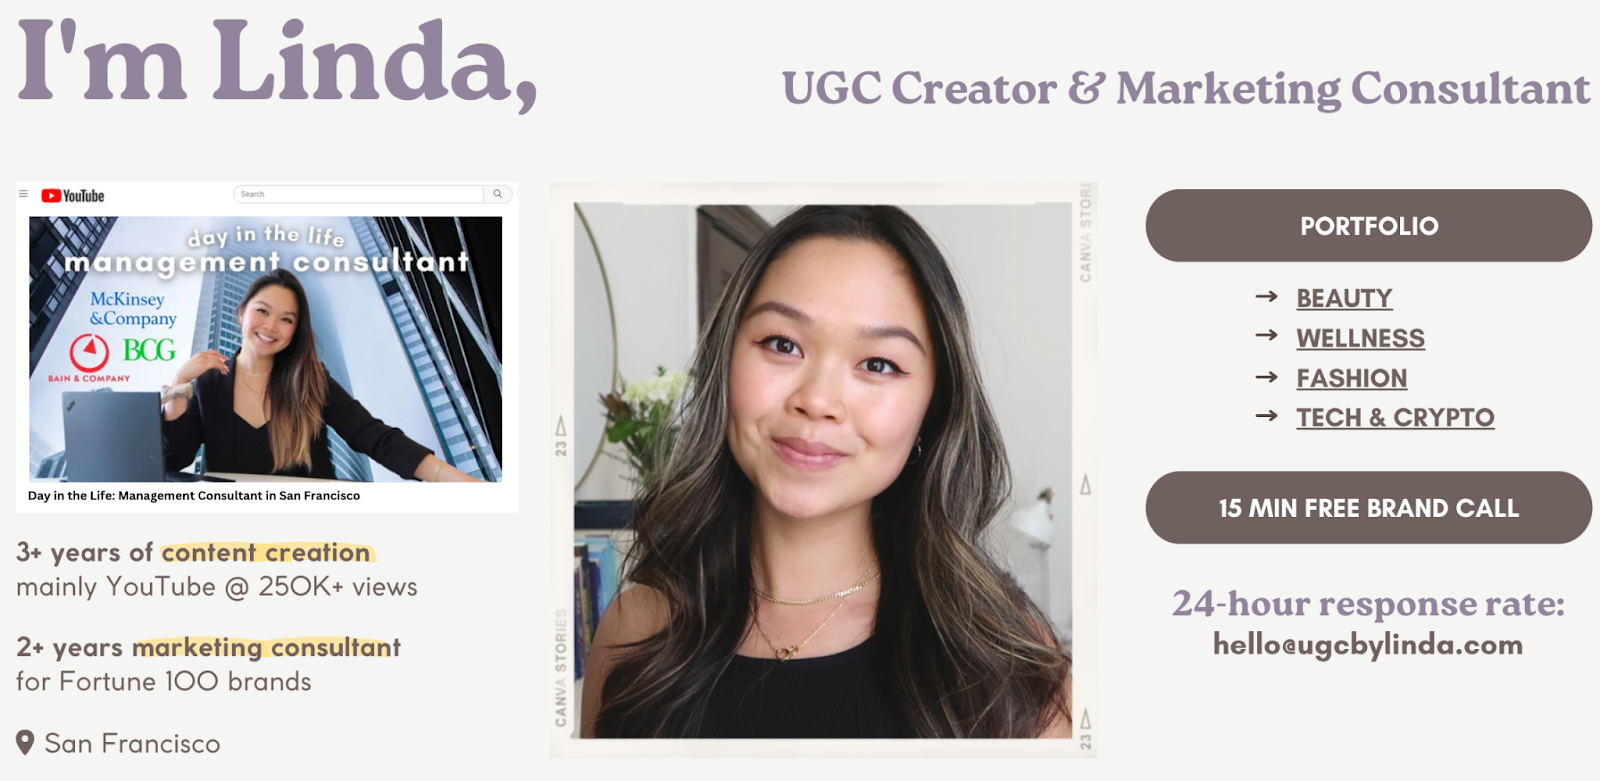 Screenshot of UGC by Linda, who sells UGC content for brands. 